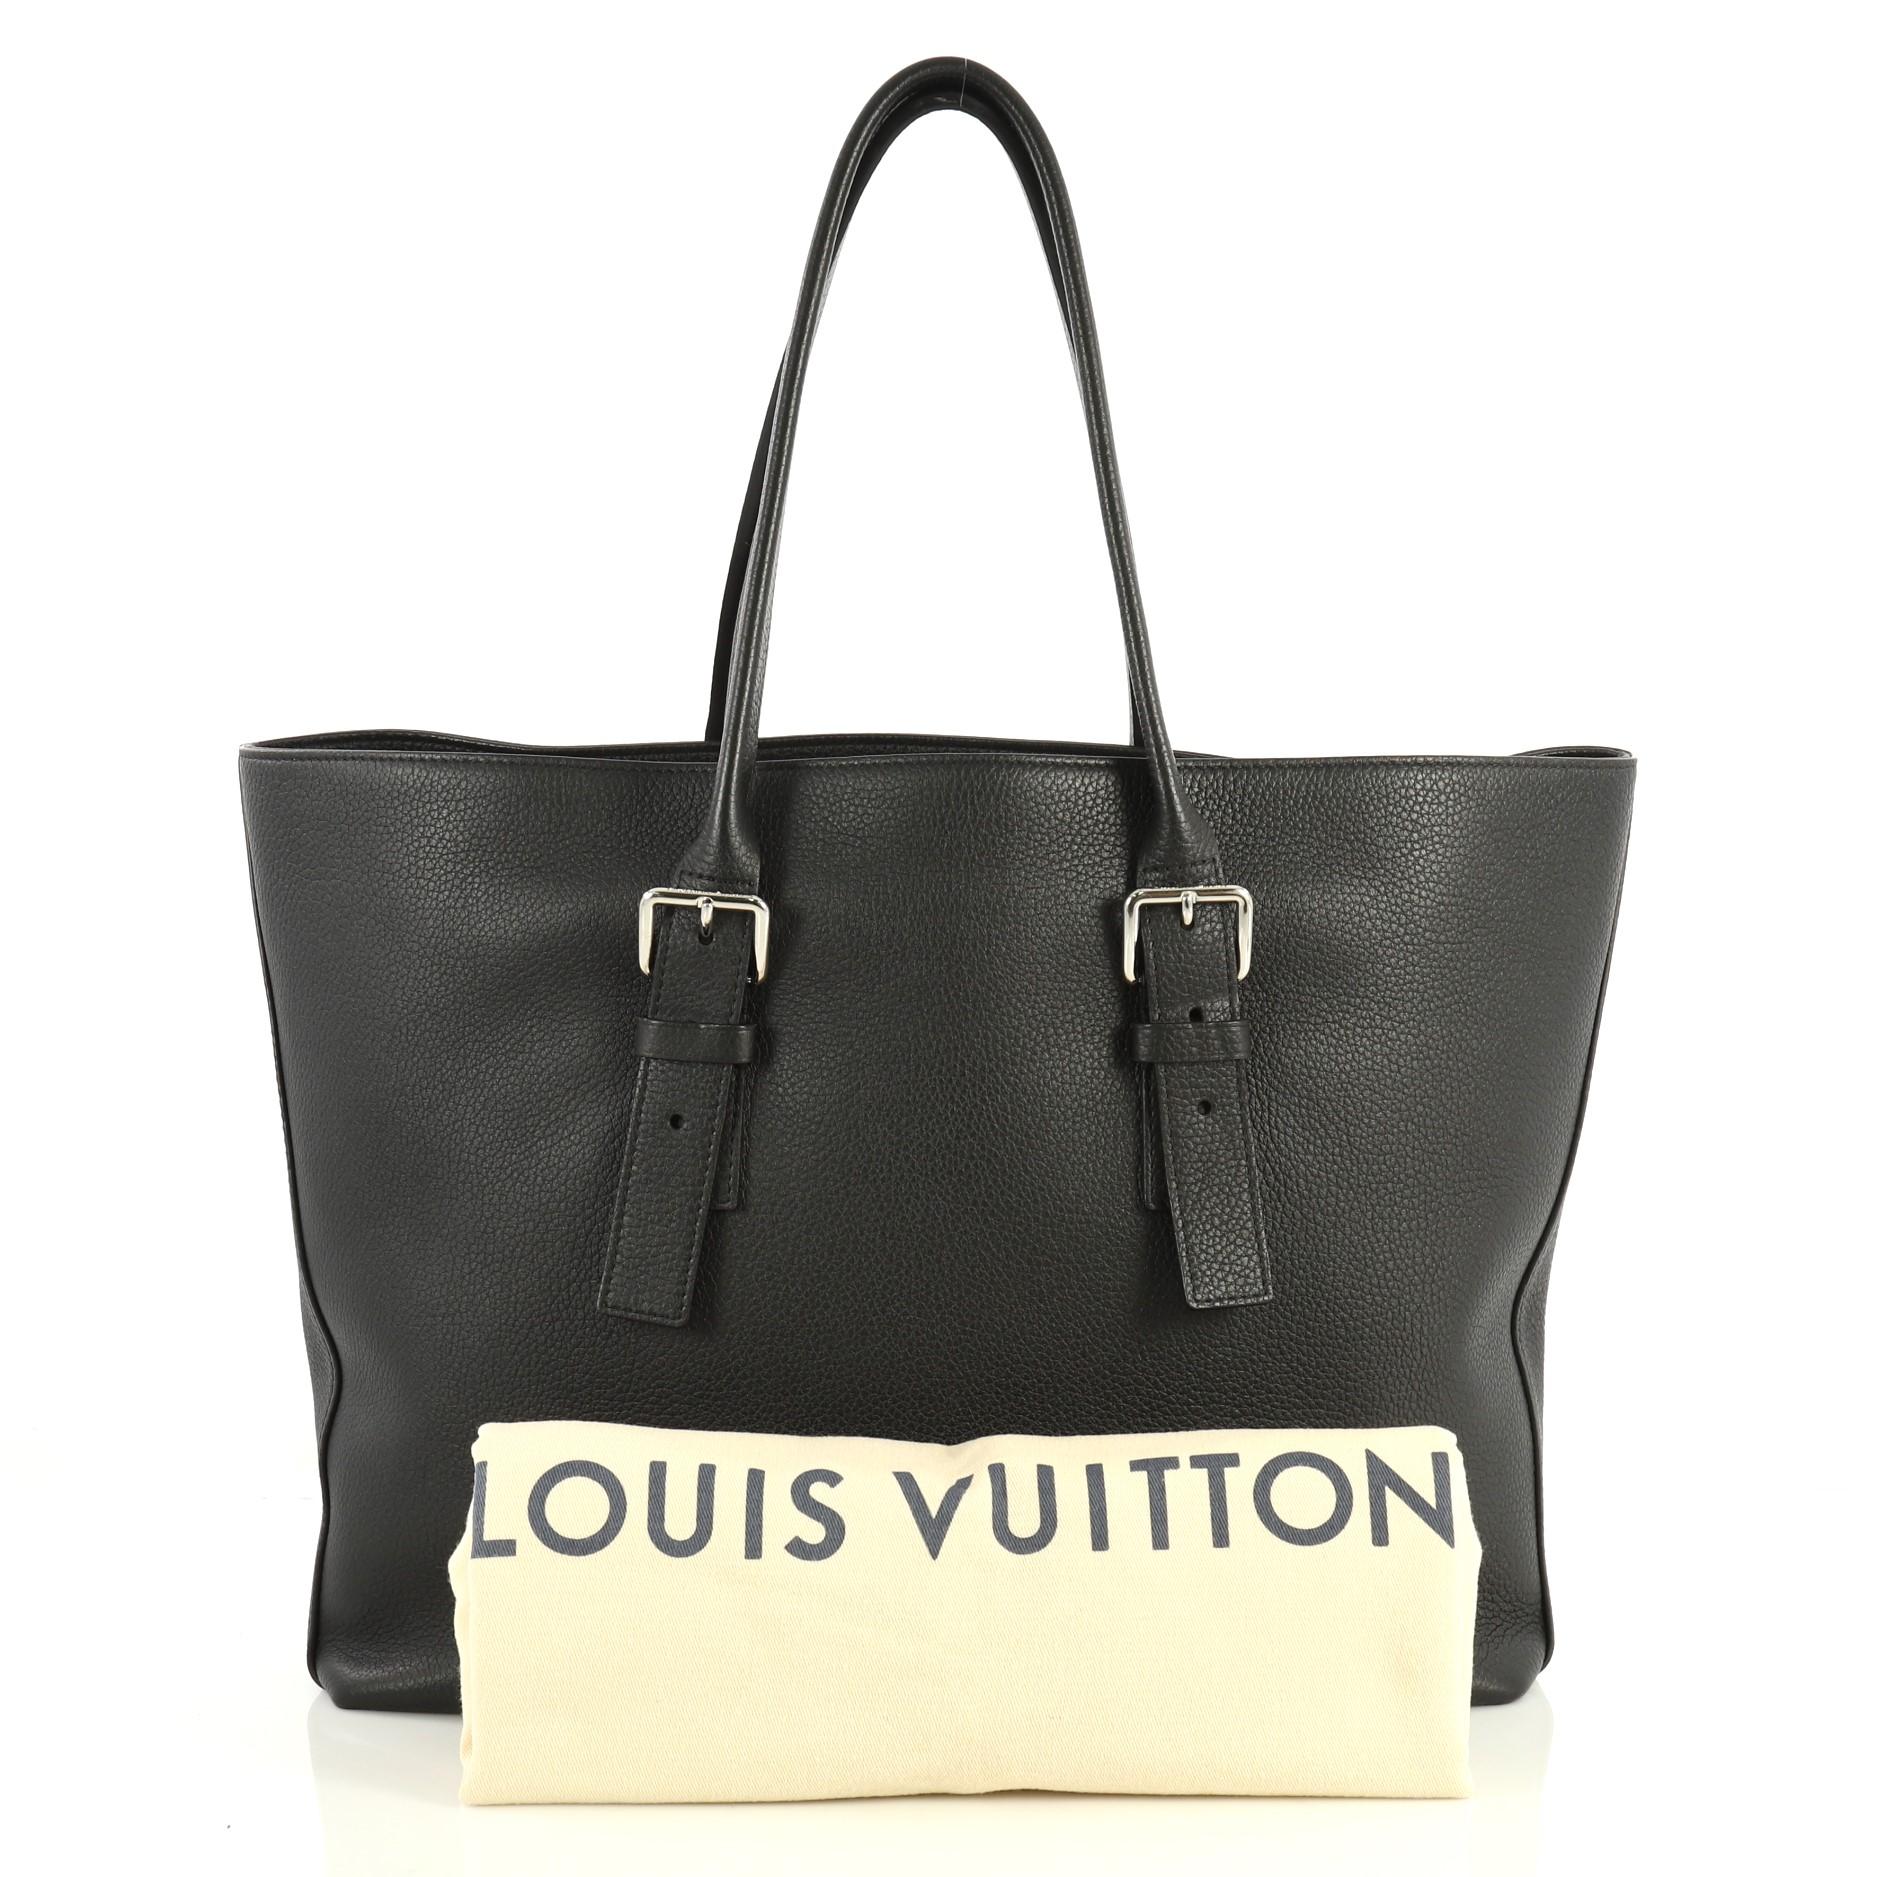 This Louis Vuitton Cabas Voyage Taurillon Leather, crafted in black taurillon leather, features dual rolled leather handles with buckle detailing and silver-tone hardware. Its wide open top showcases a black microfiber and leather interior with side